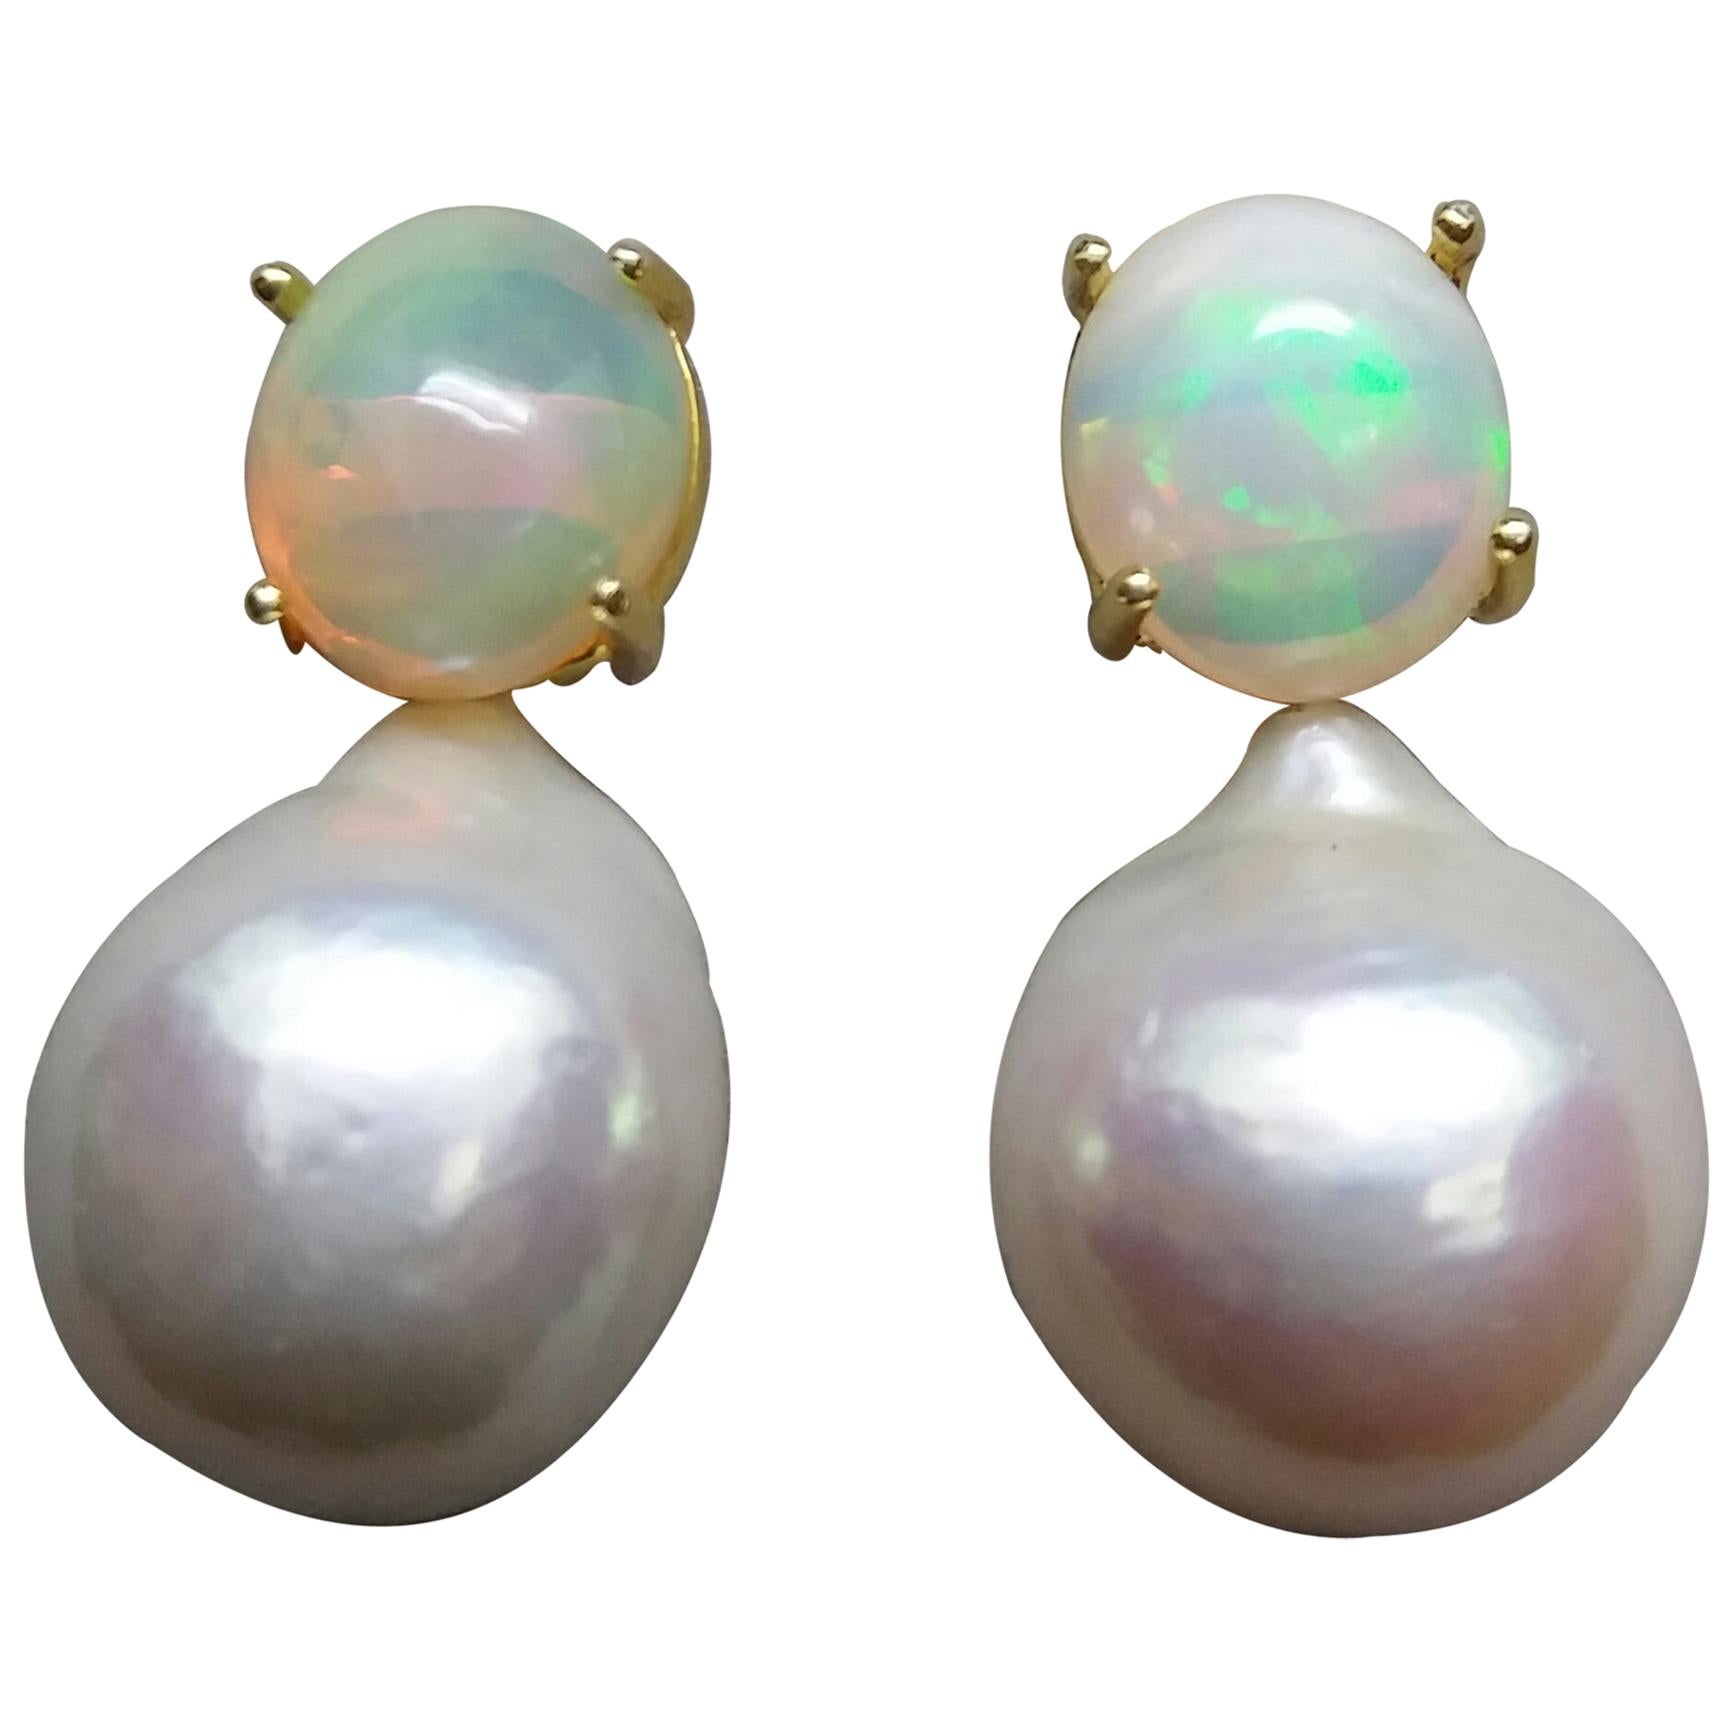 Big Size White Baroque Pearls Oval Solid Opal Cabochons Yellow Gold Earrings